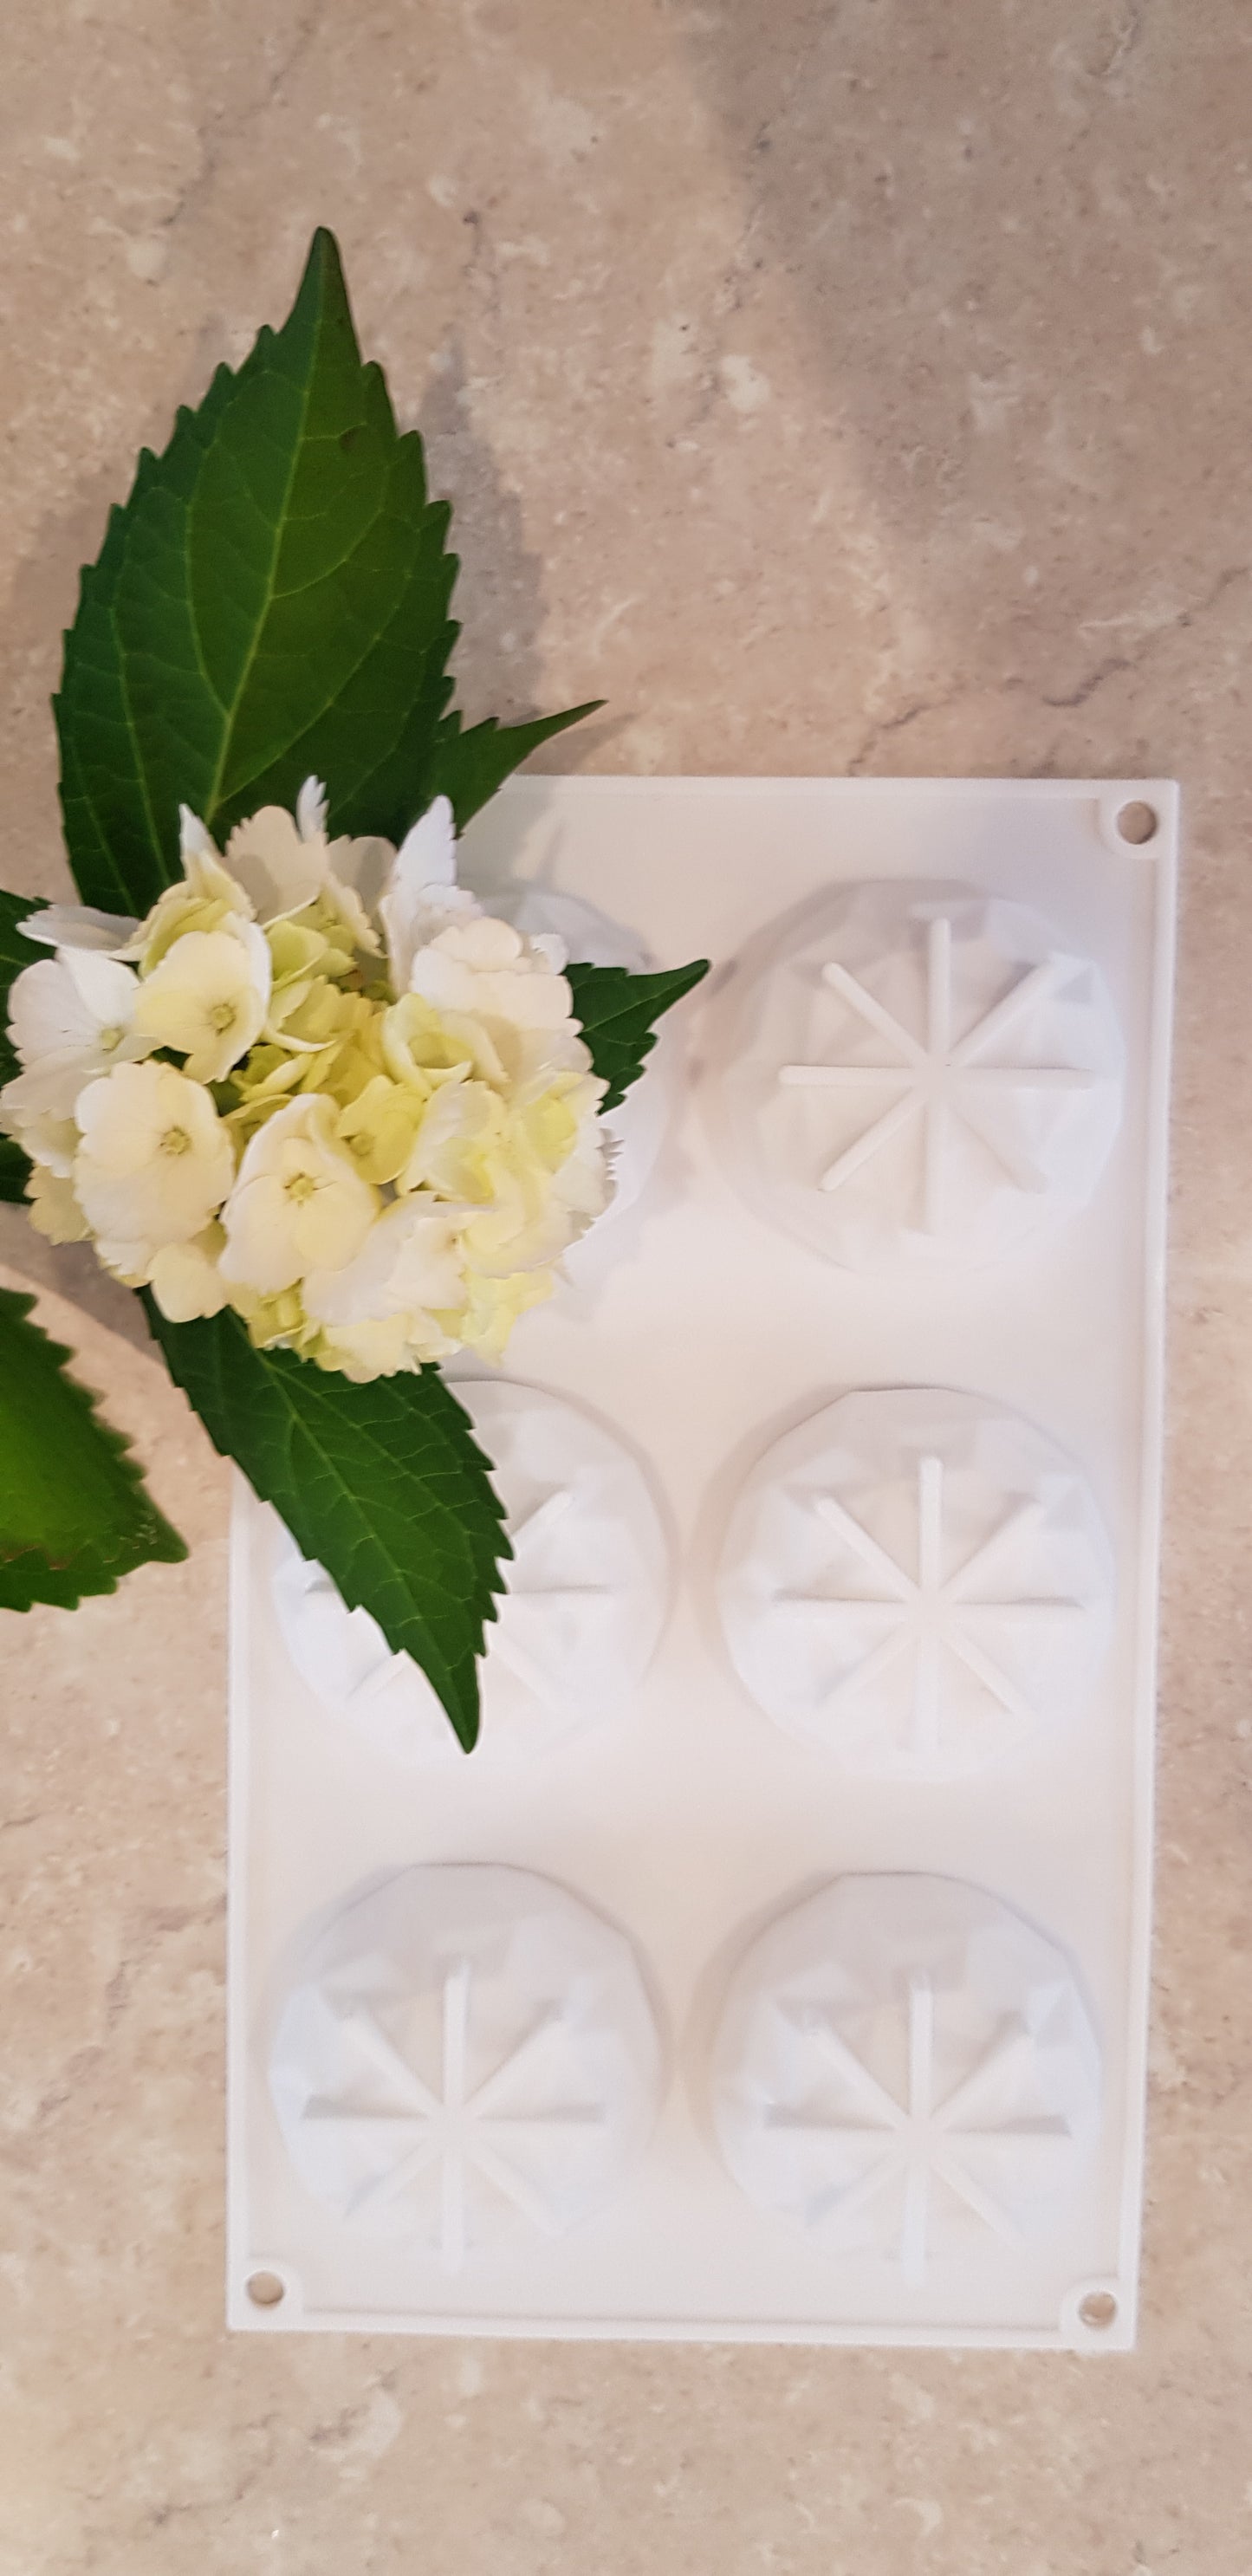 Crystal Cut Silicone Mould 6 cavity